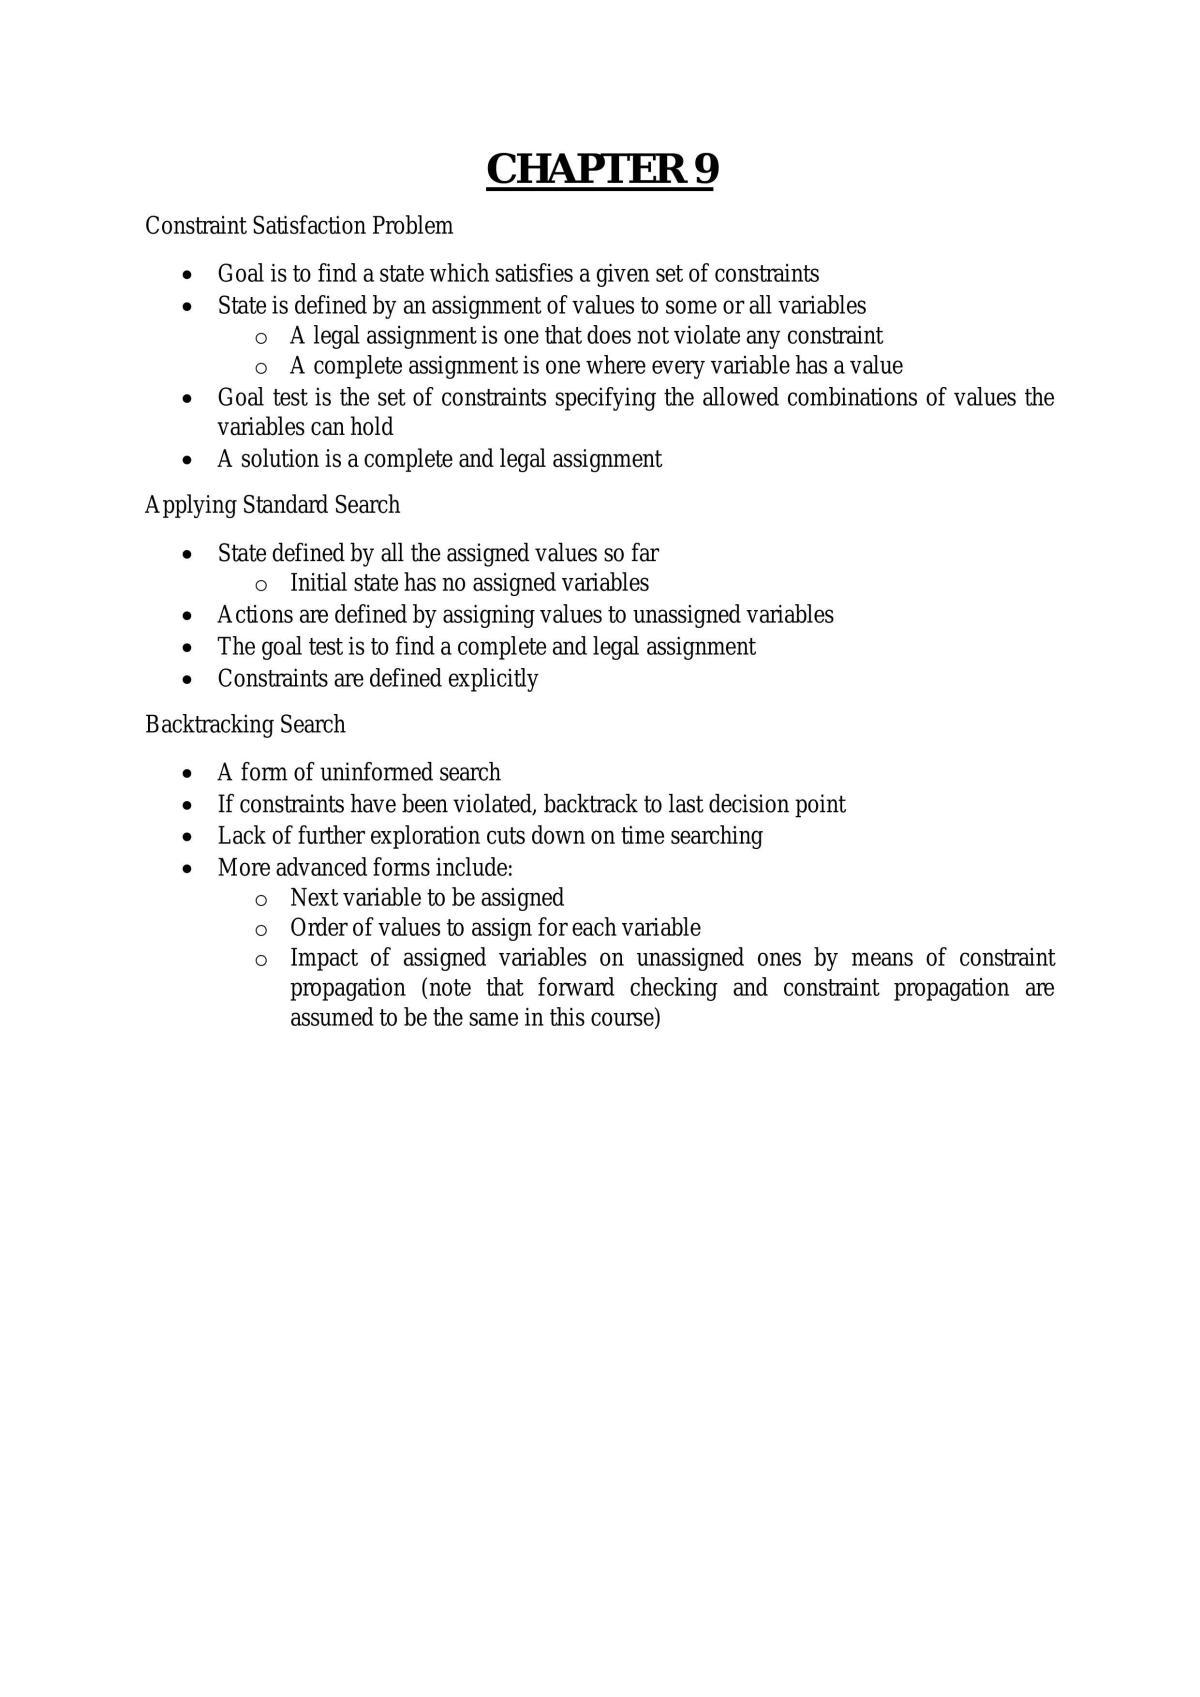 Data Science and Artificial Intelligence Summary Notes - Page 24